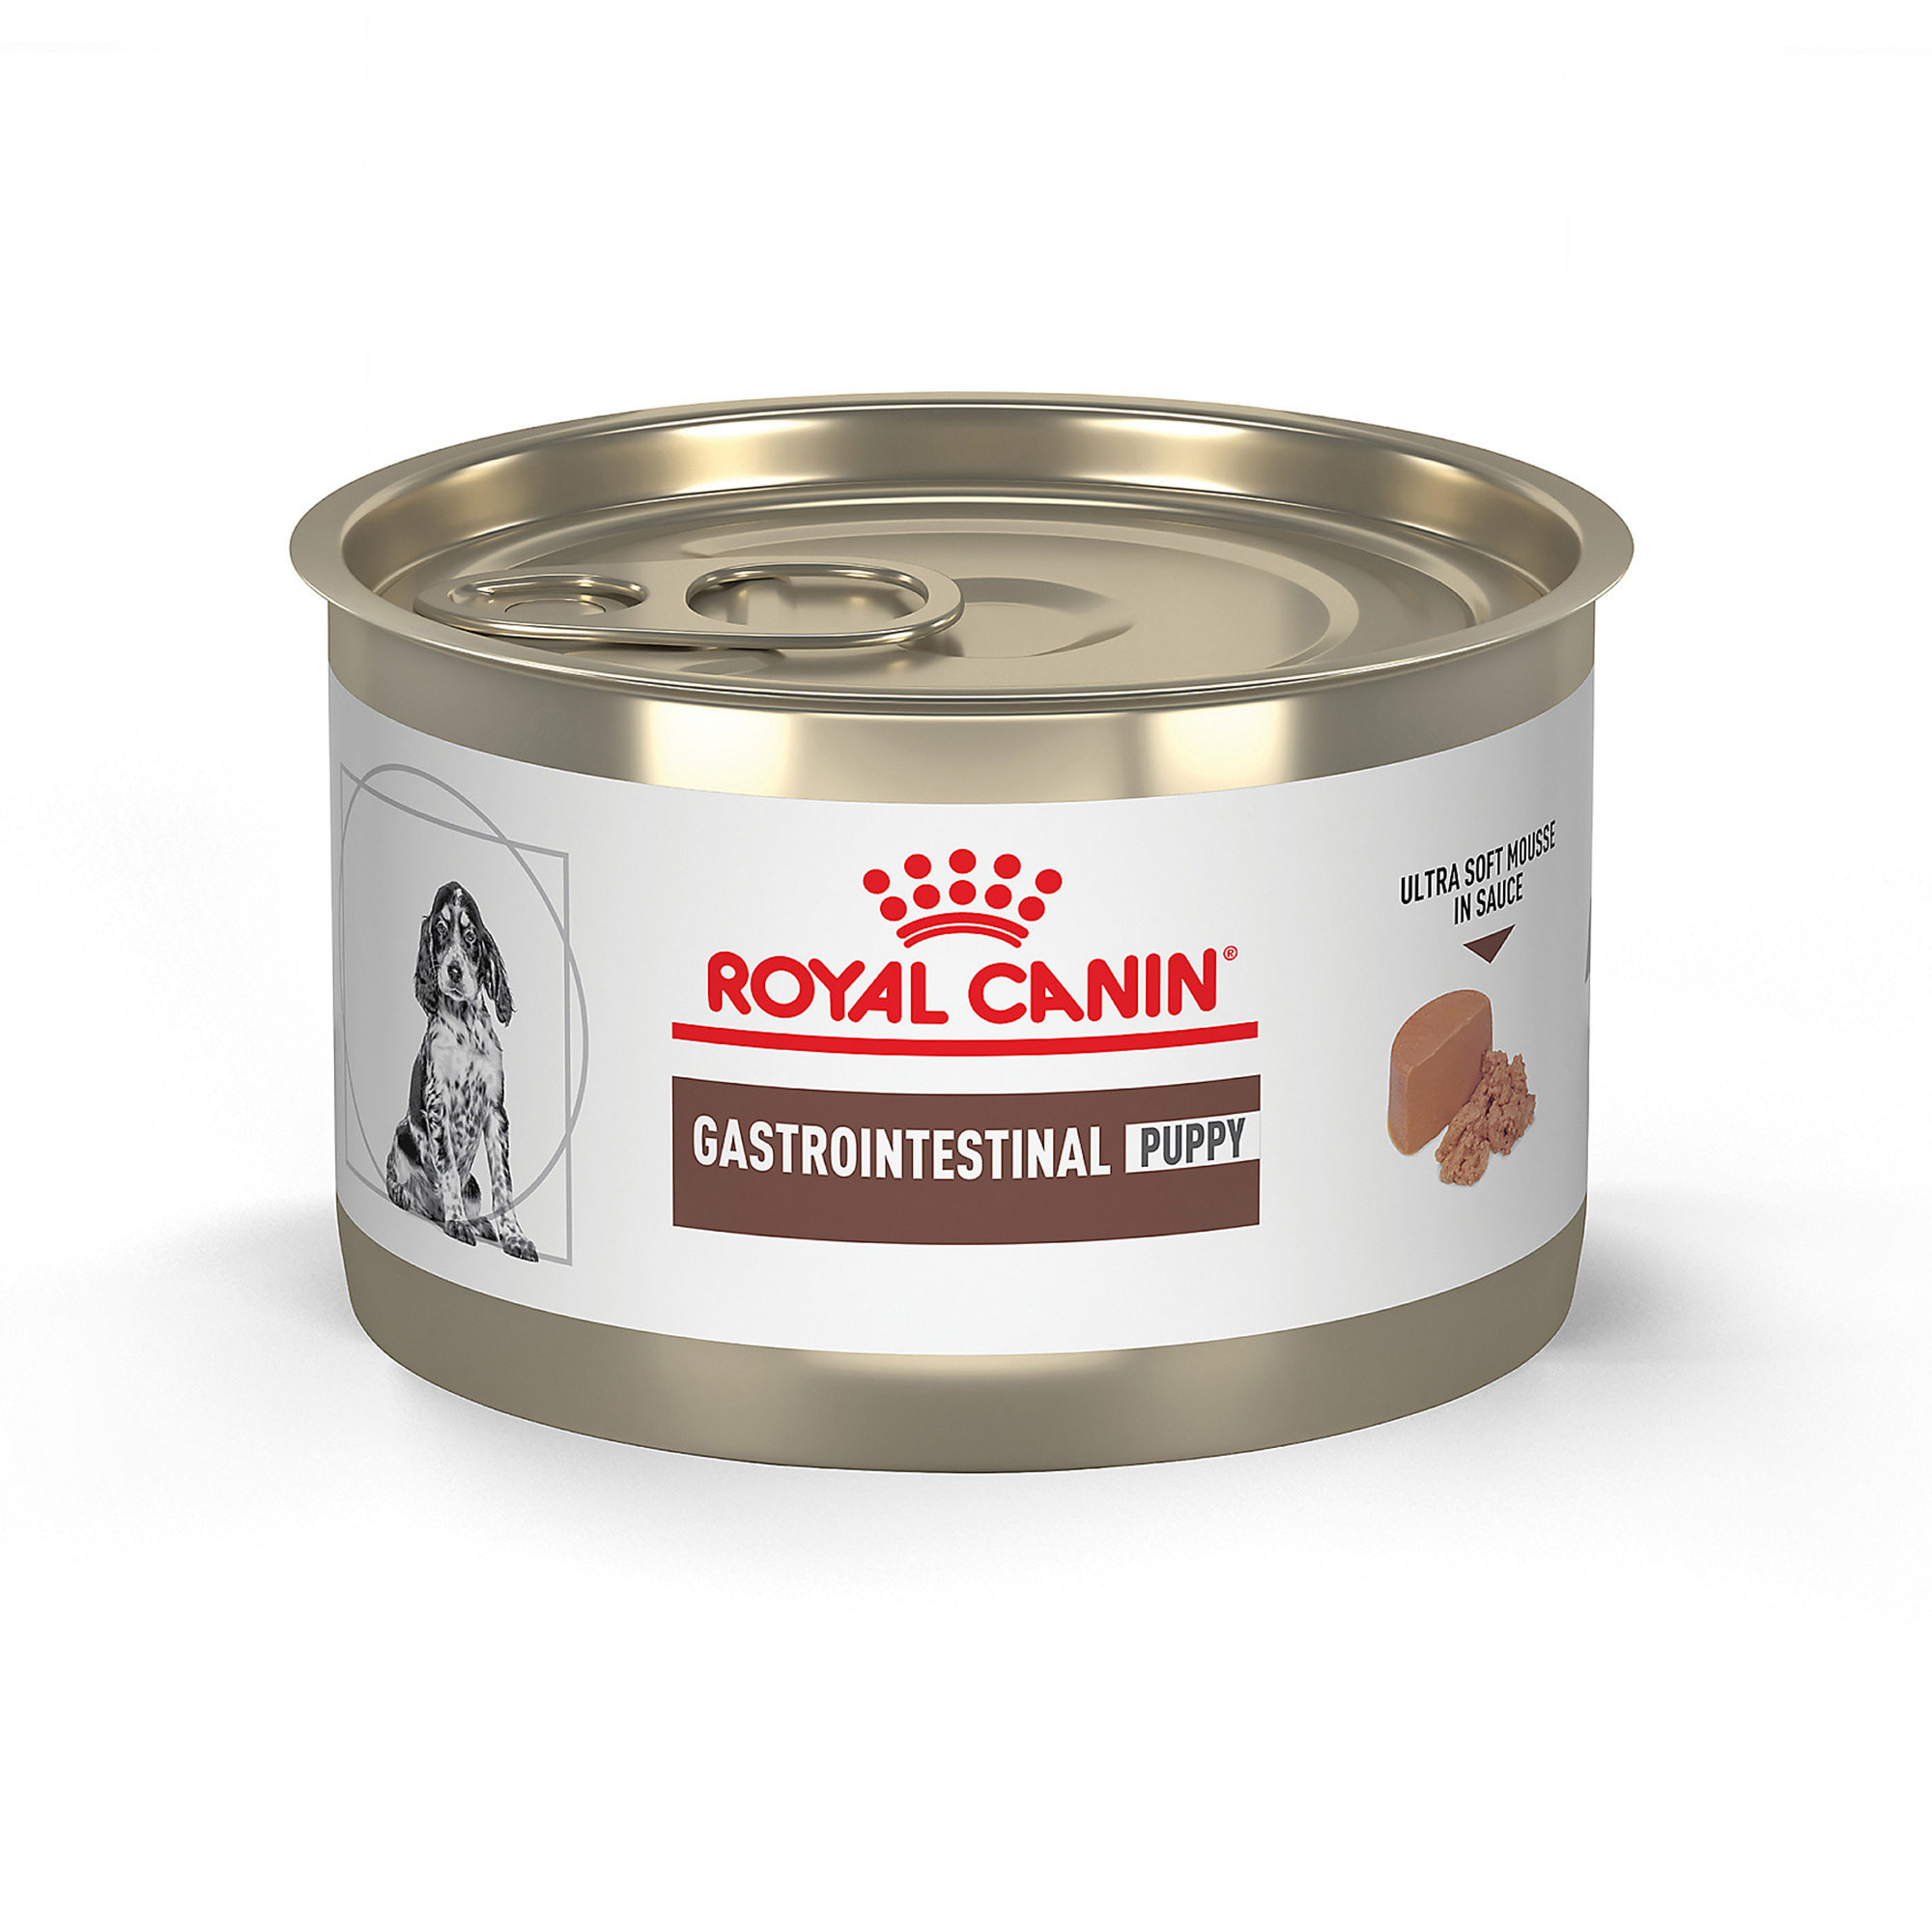 Royal Canin Veterinary Diet Gastrointestinal Puppy Ultra Soft Mousse in